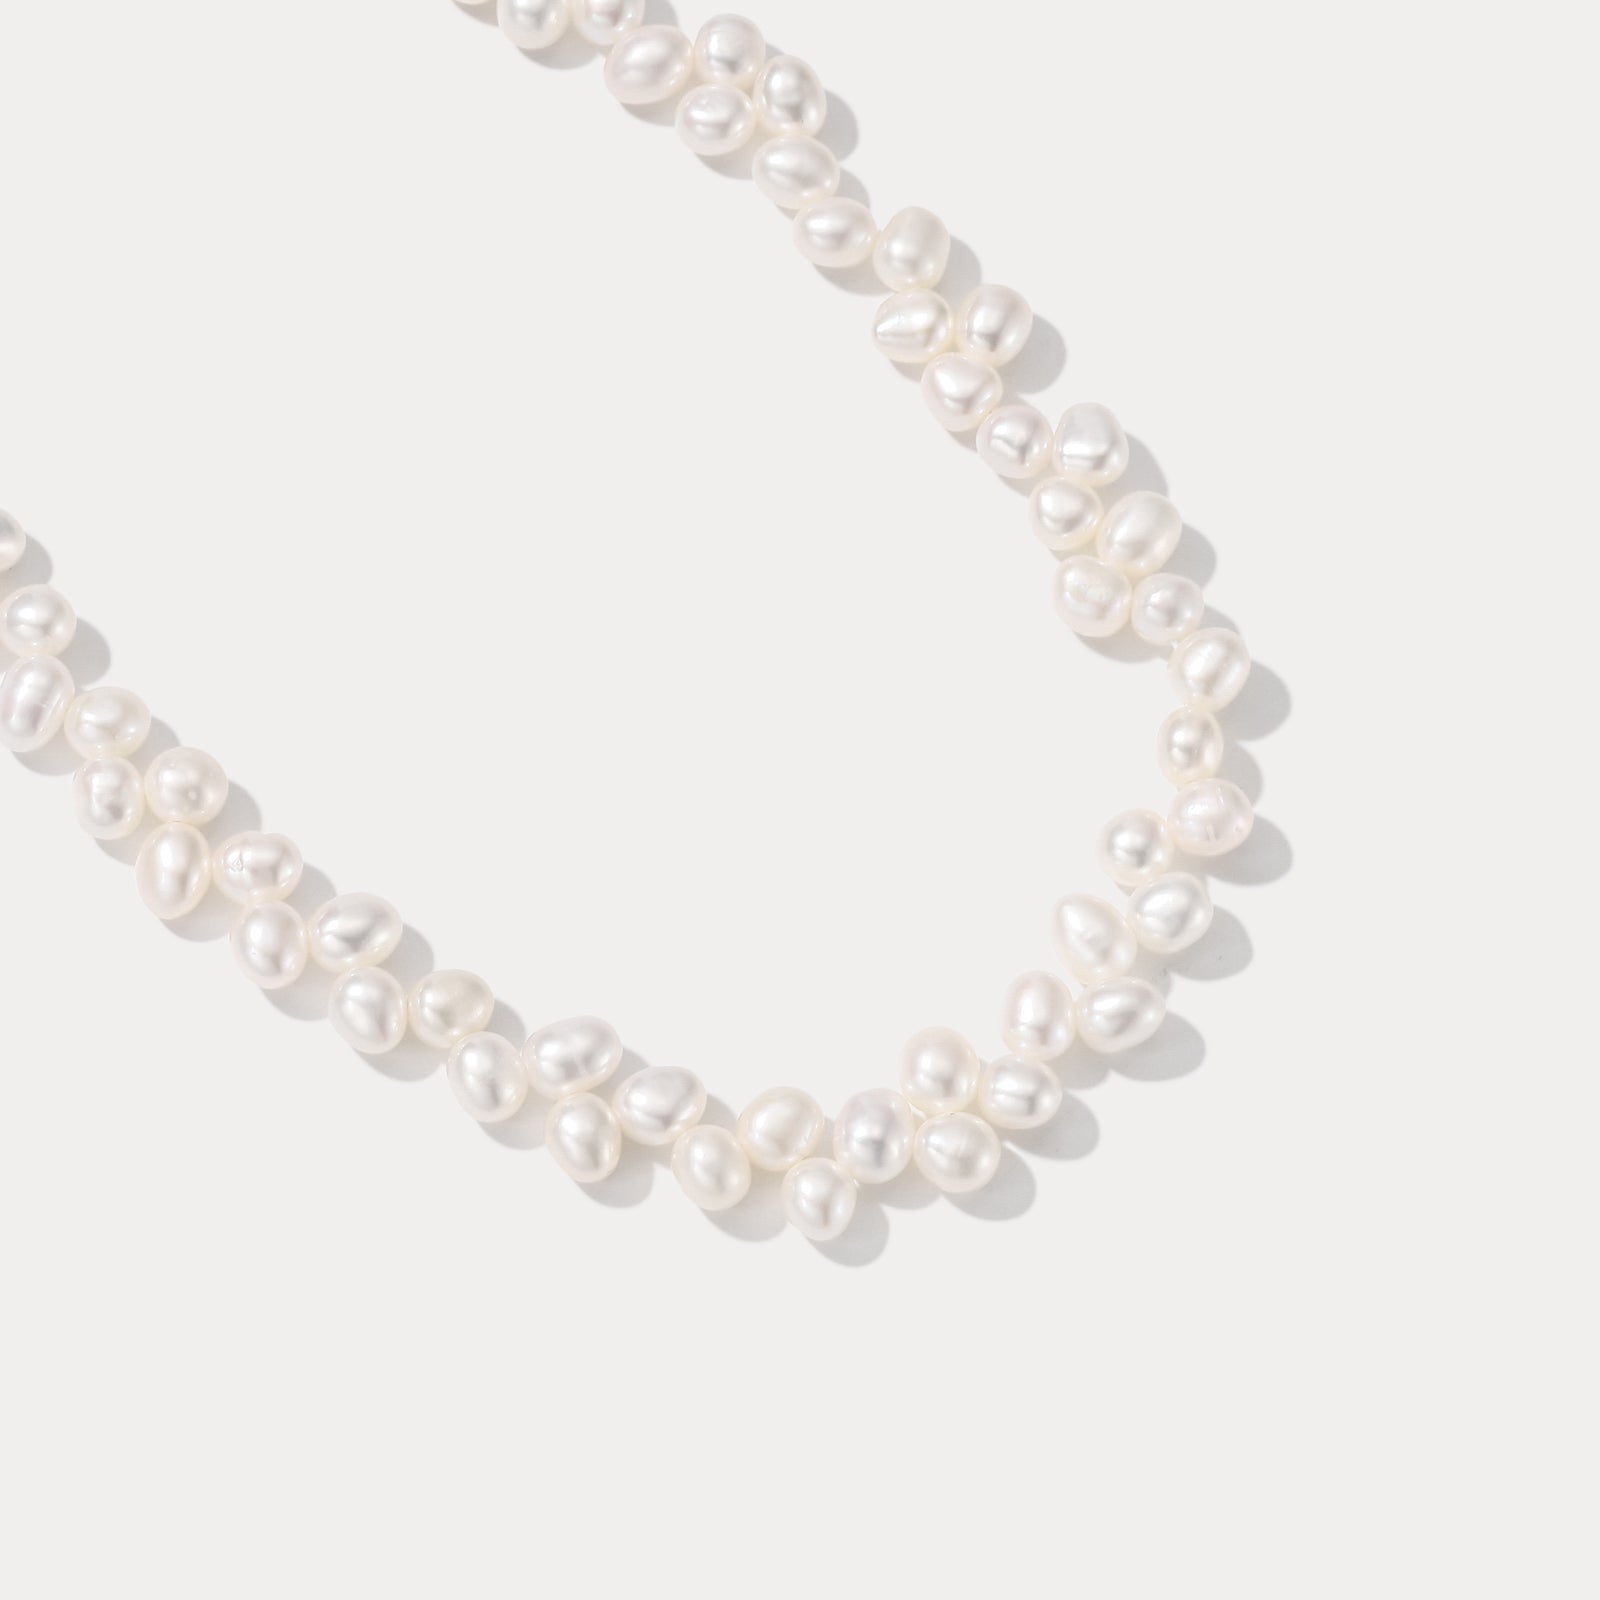 Interlaced Dainty Pearl Necklace